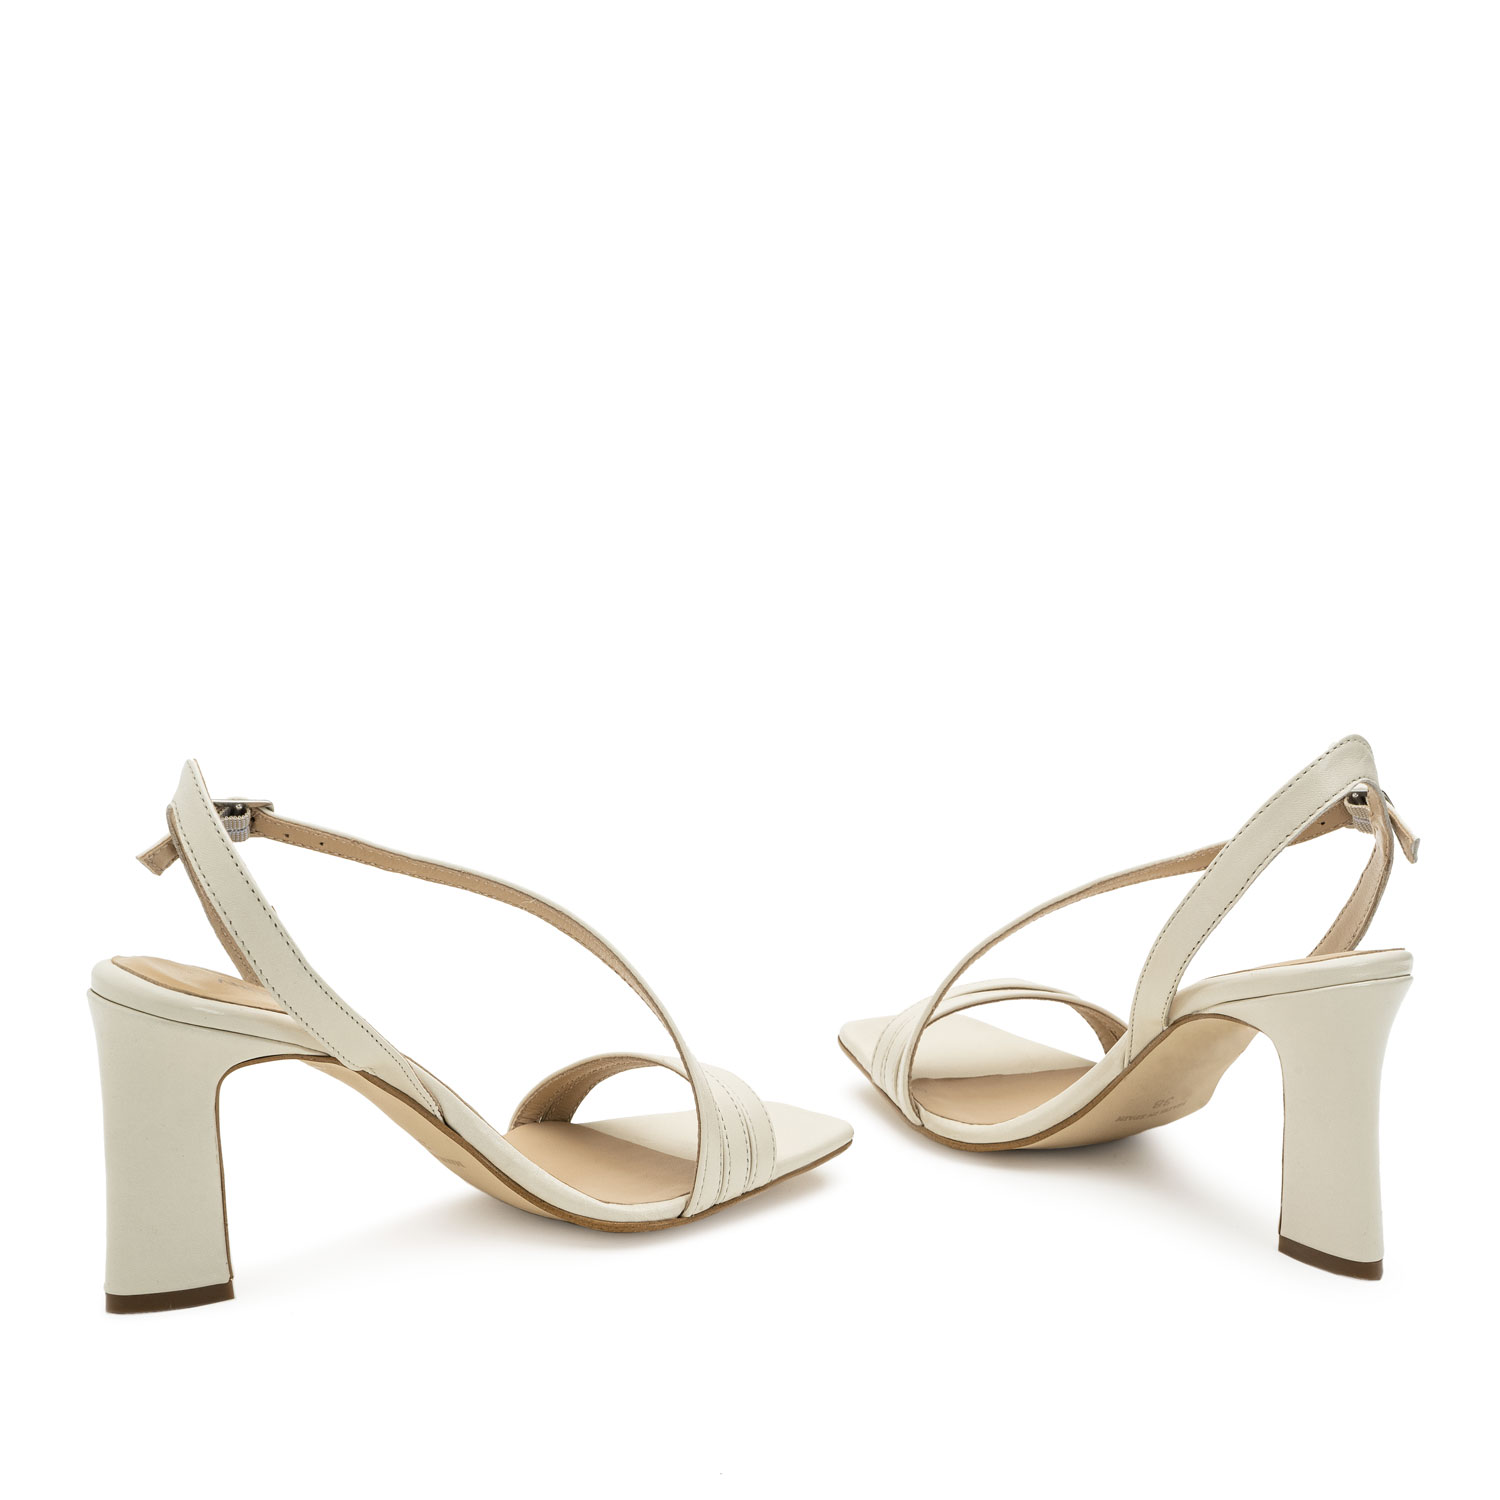 Crossover Heeled Sandals in Cream Leather 